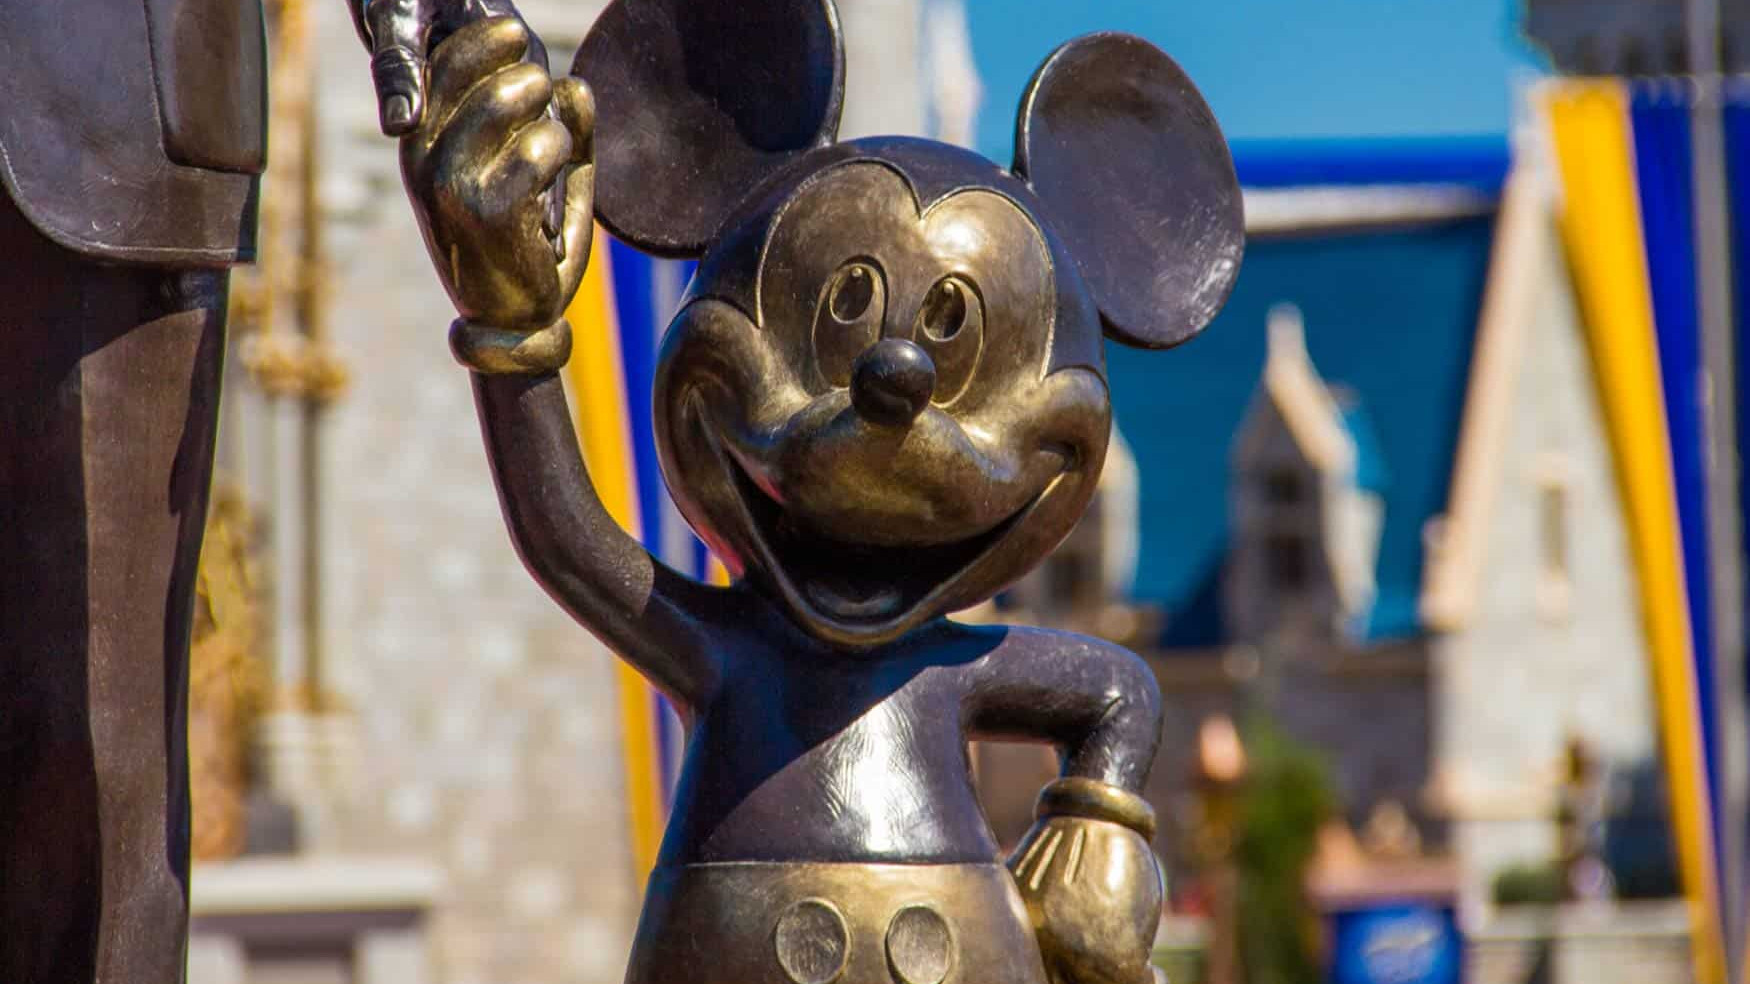 Mickey Mouse Statue - Disney World Planning Guide - The Best Times to Visit Disney World